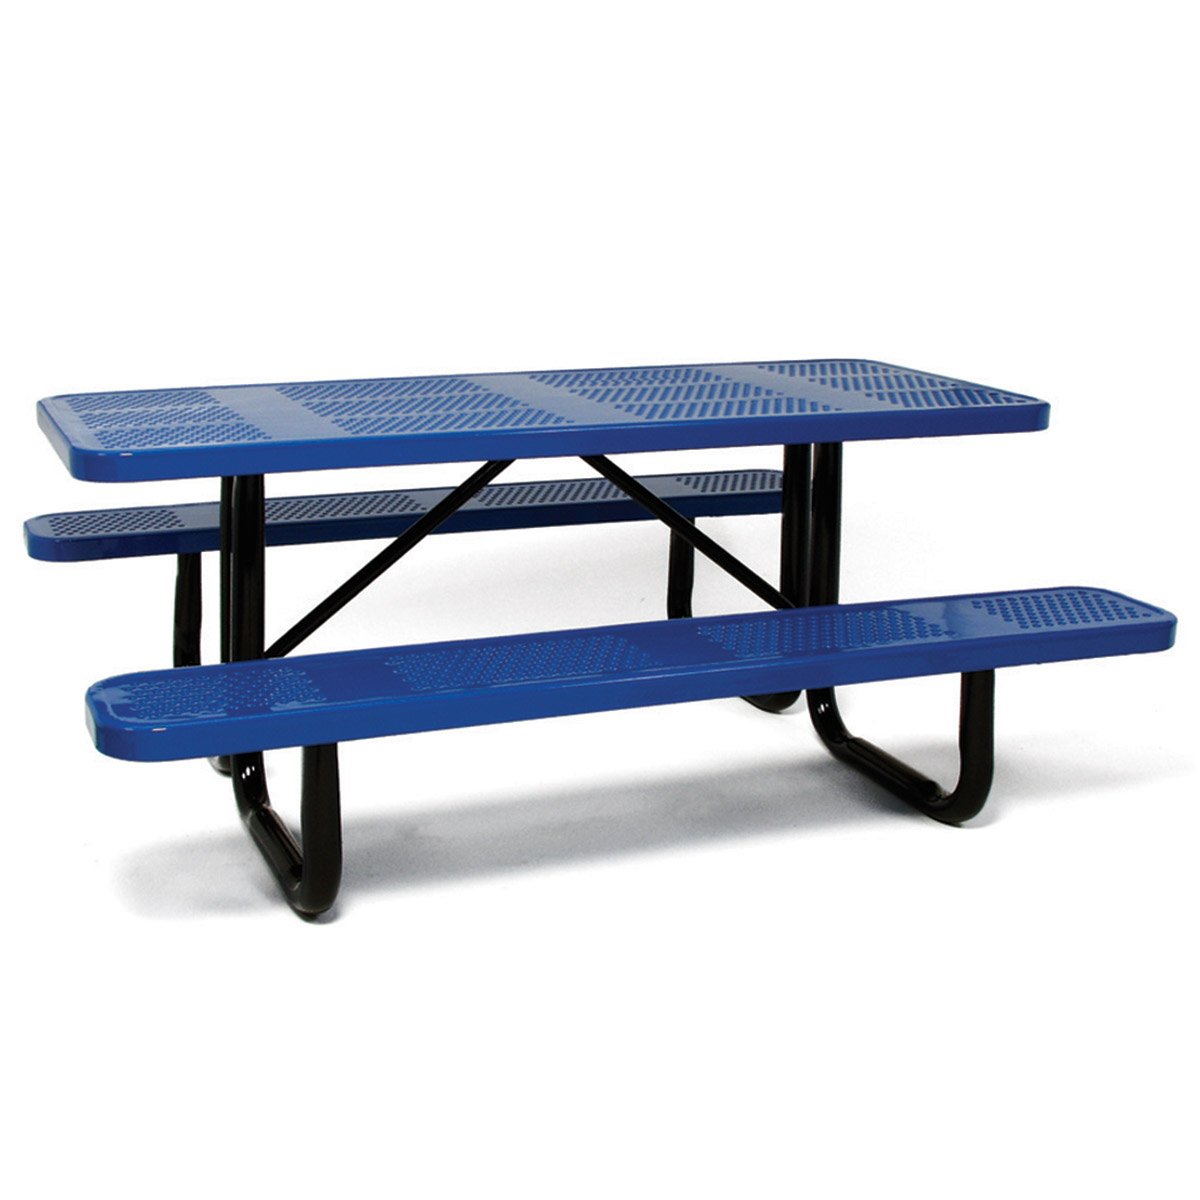 Leisure Craft 6′ Portable Picnic Table Perforated